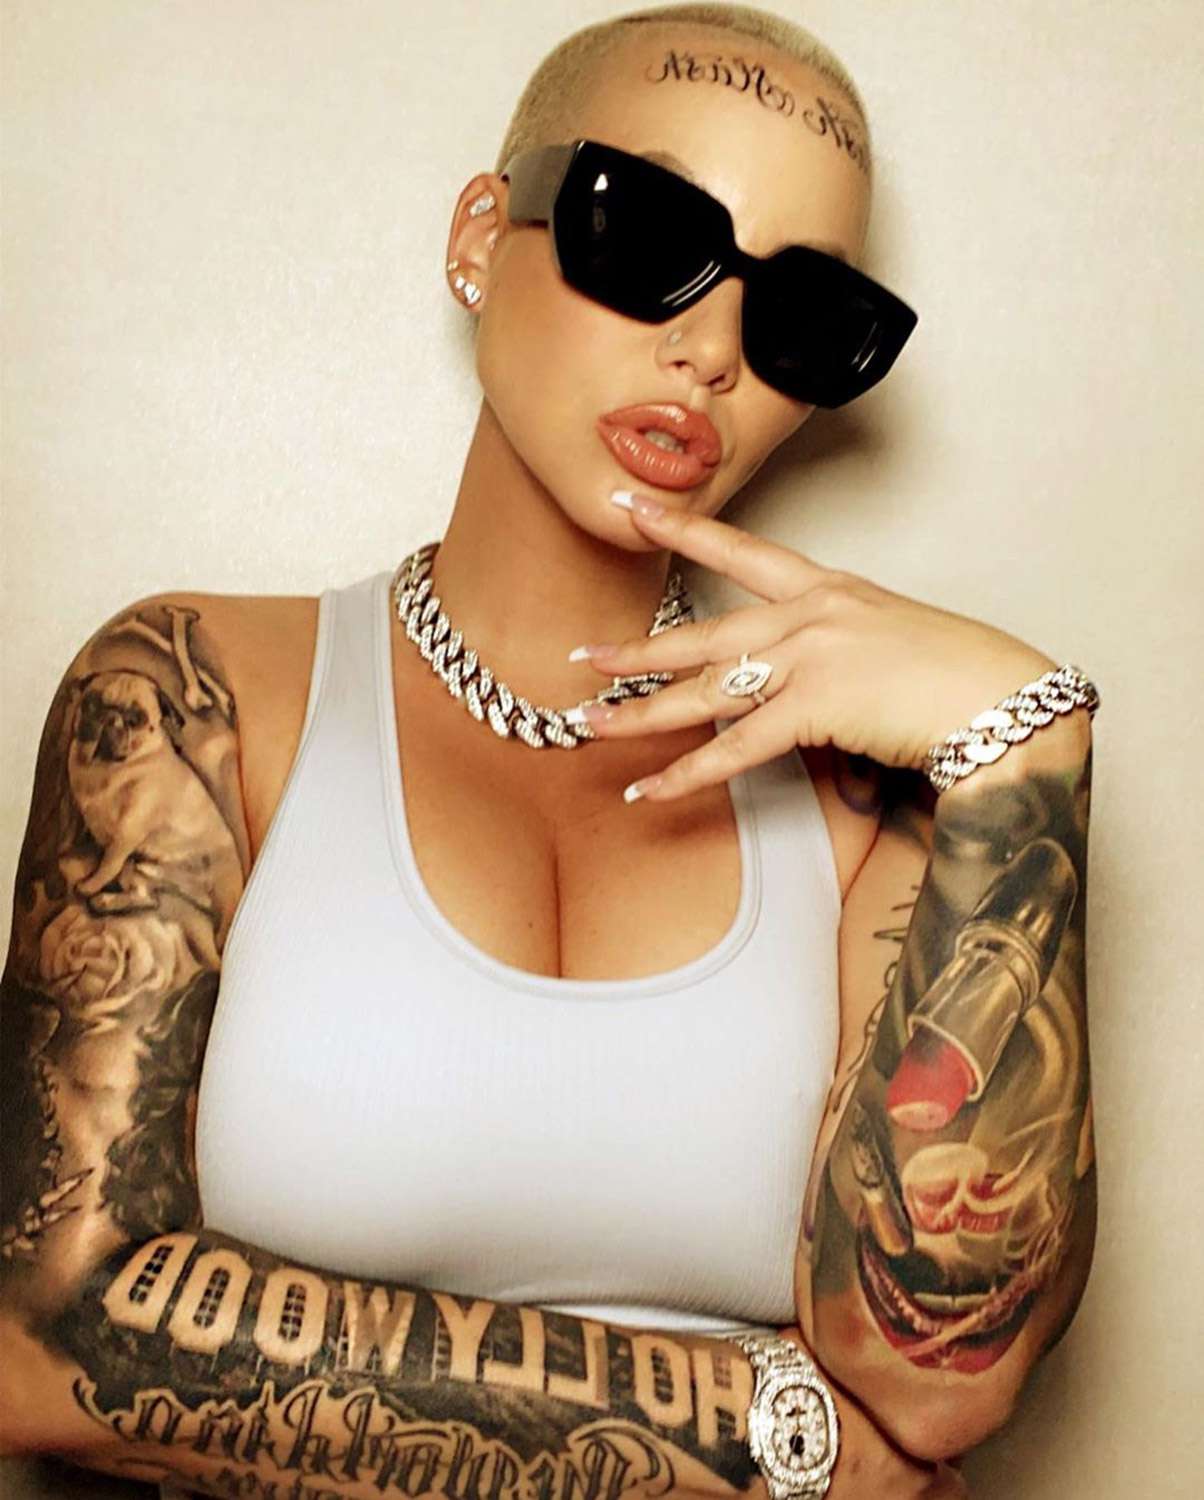 What is amber rose snapchat name